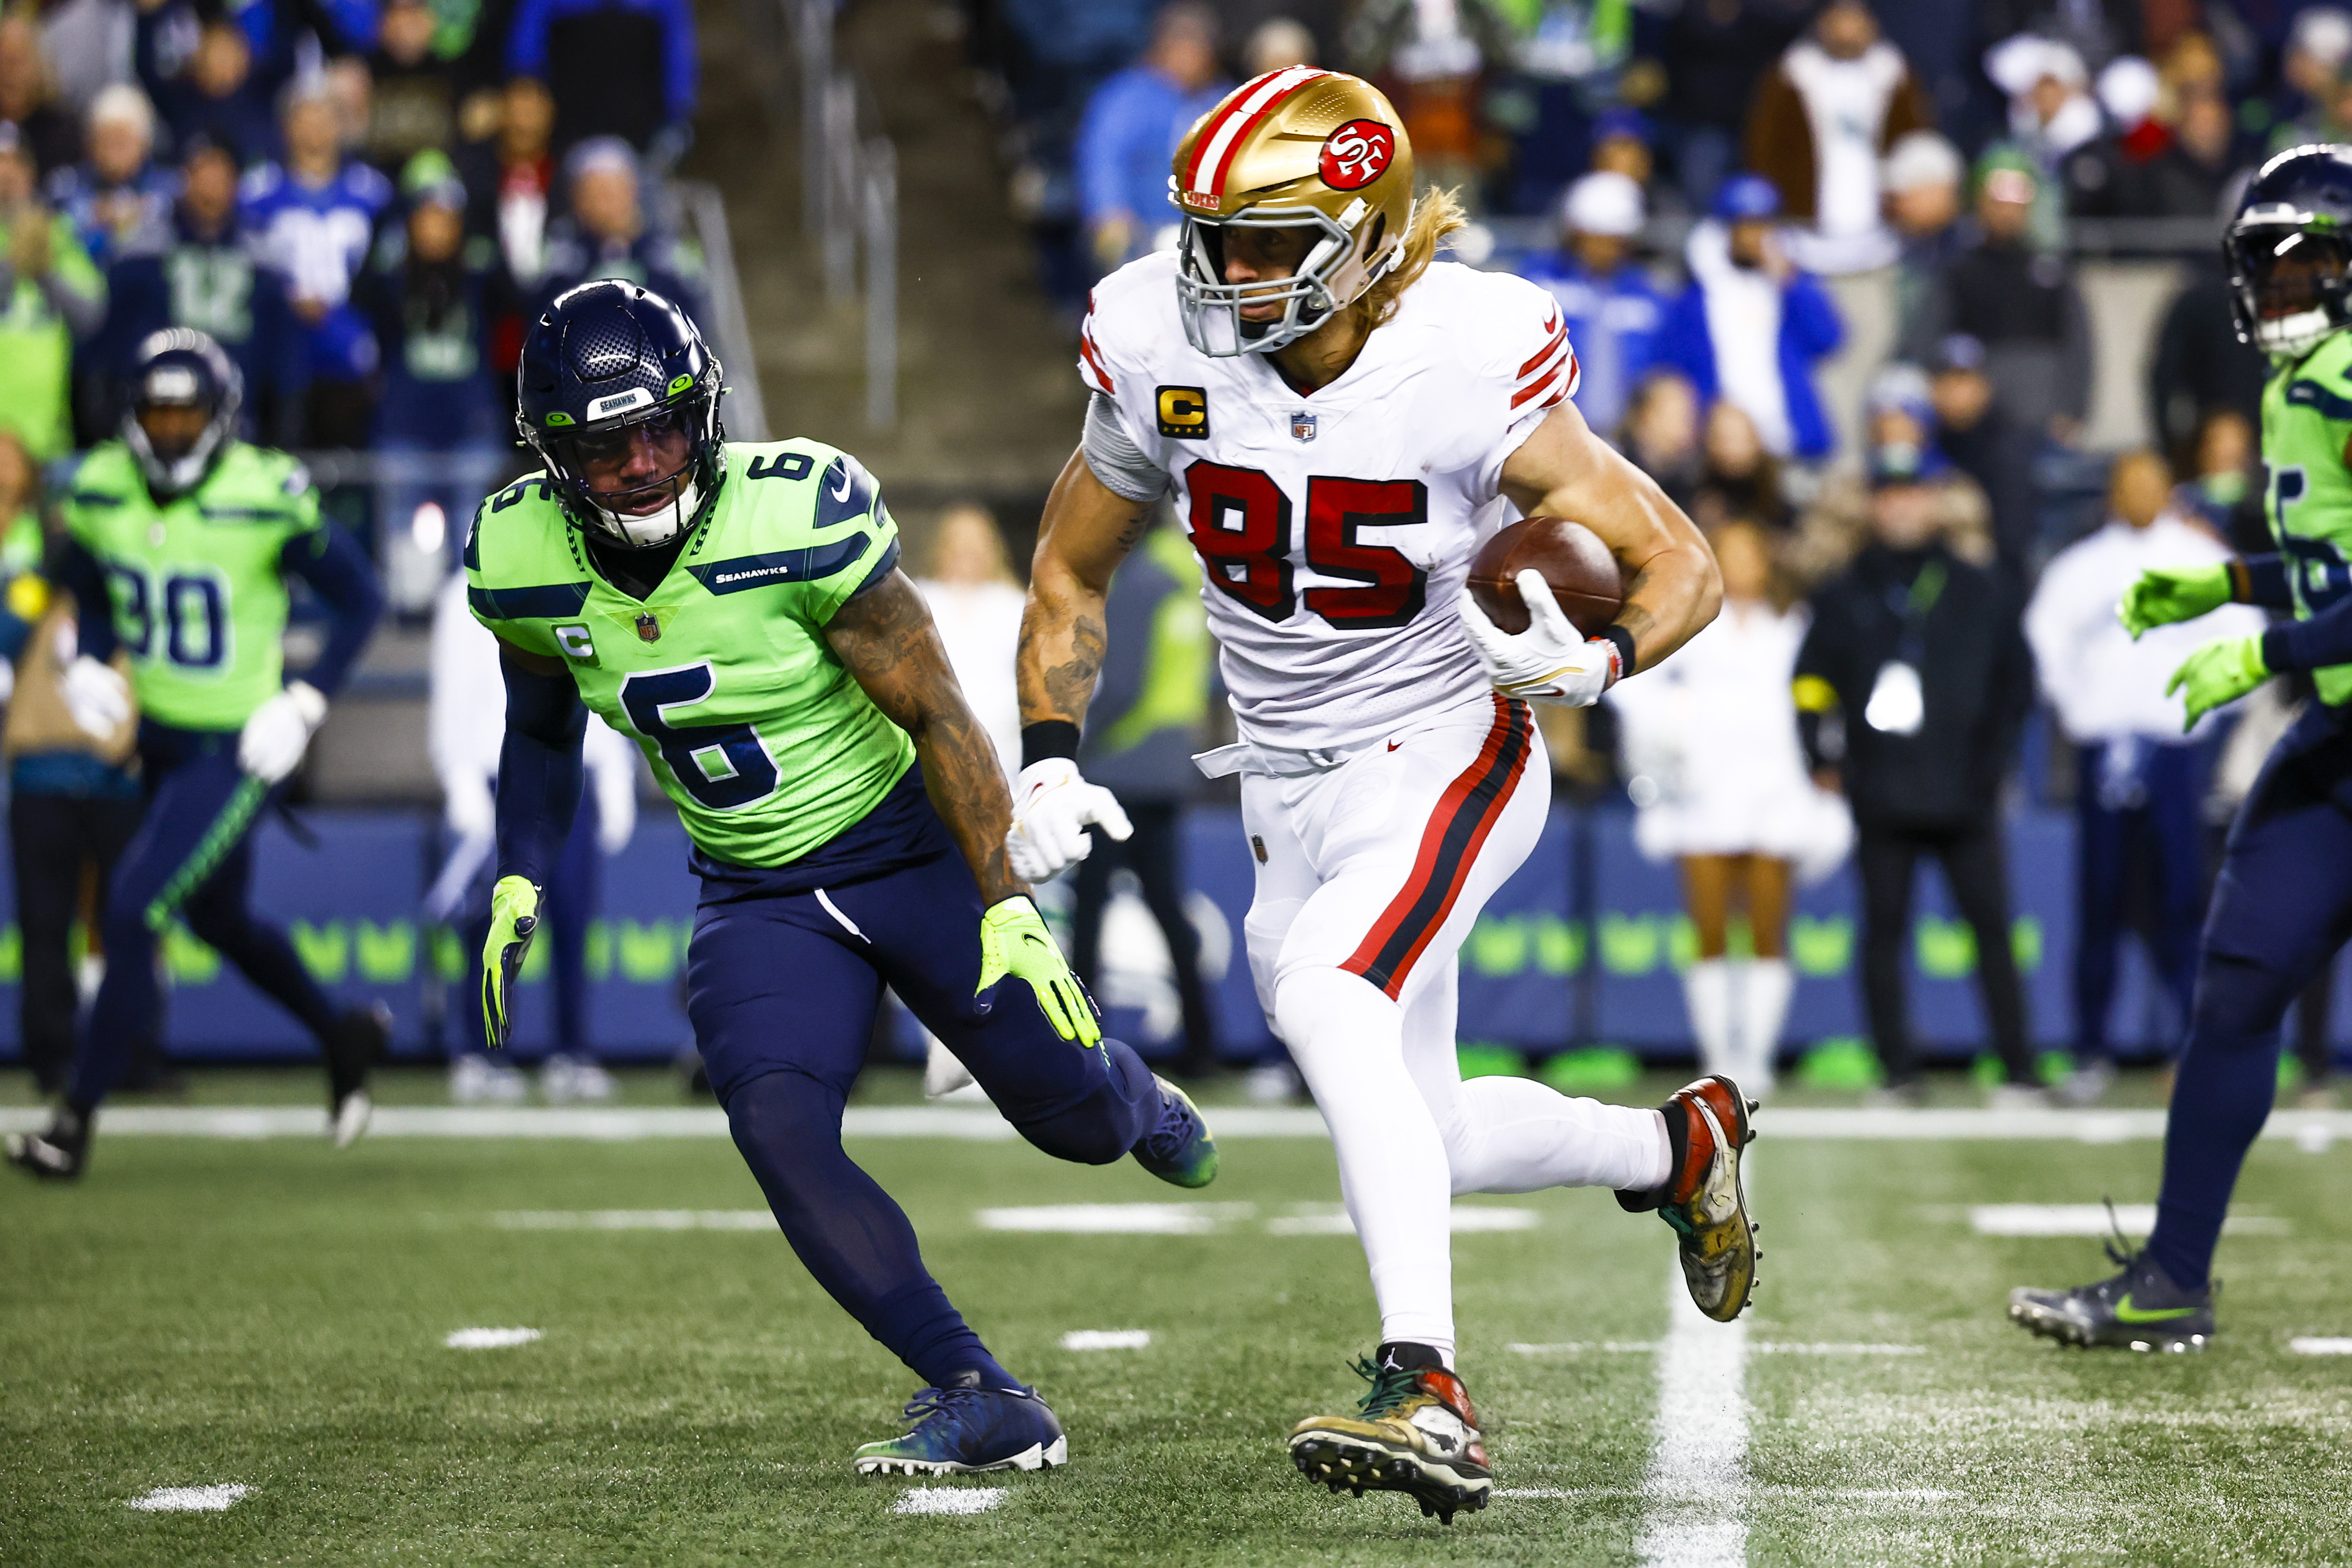 Seattle Seahawks Trail San Francisco 49ers at Halftime After Brutal  Momentum-Changing Fumble - Sports Illustrated Seattle Seahawks News,  Analysis and More